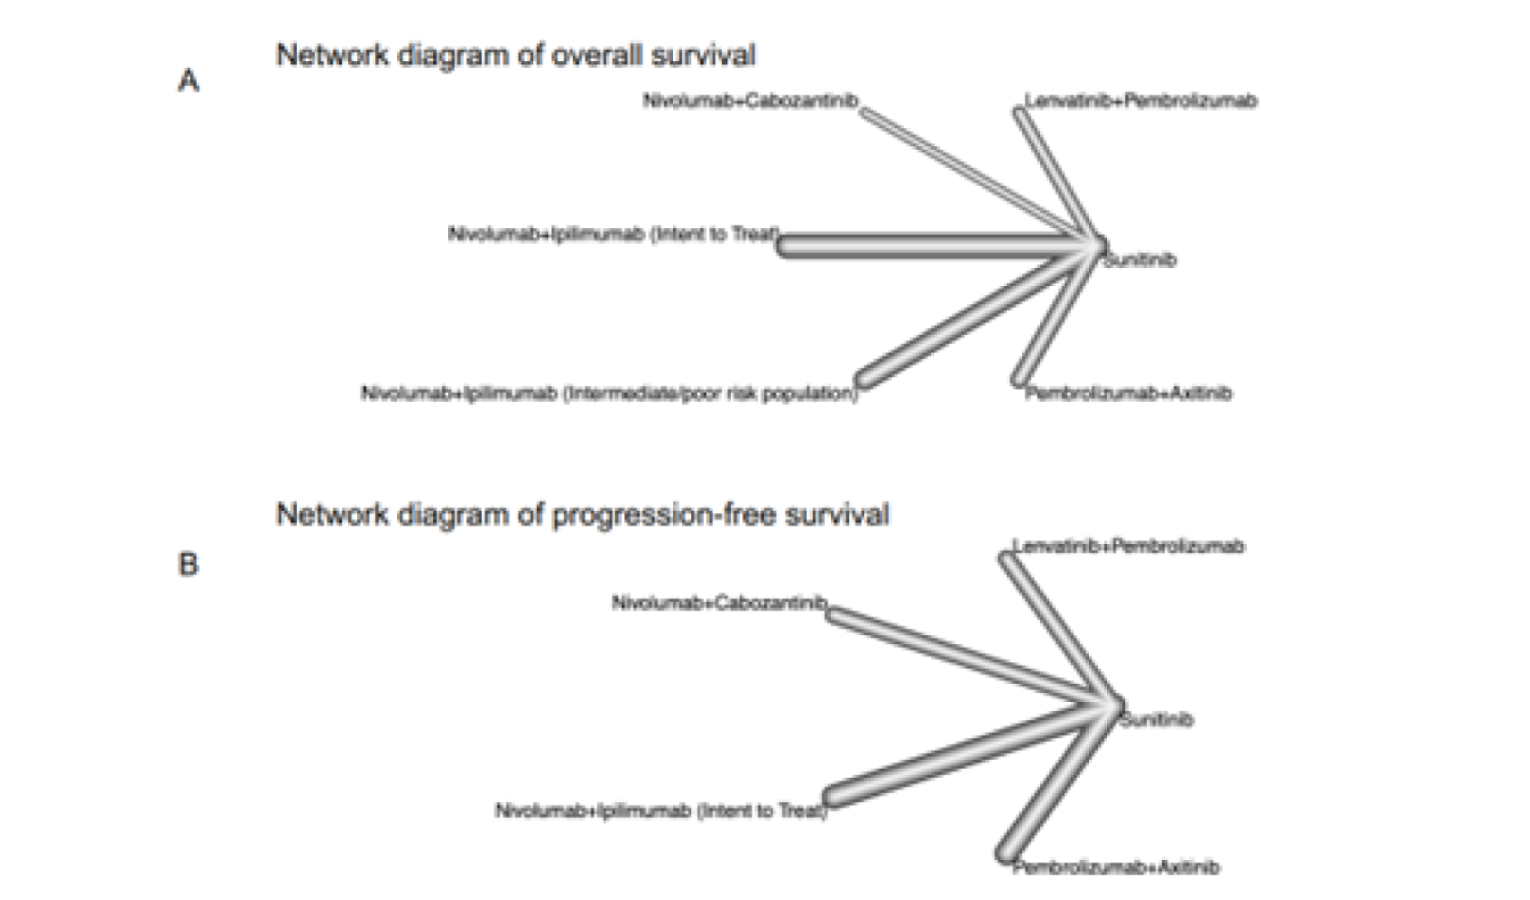 Network diagrams for overall survival and progression-free survival, in which nodes represent included interventions and the connections represent trials connecting the nodes.